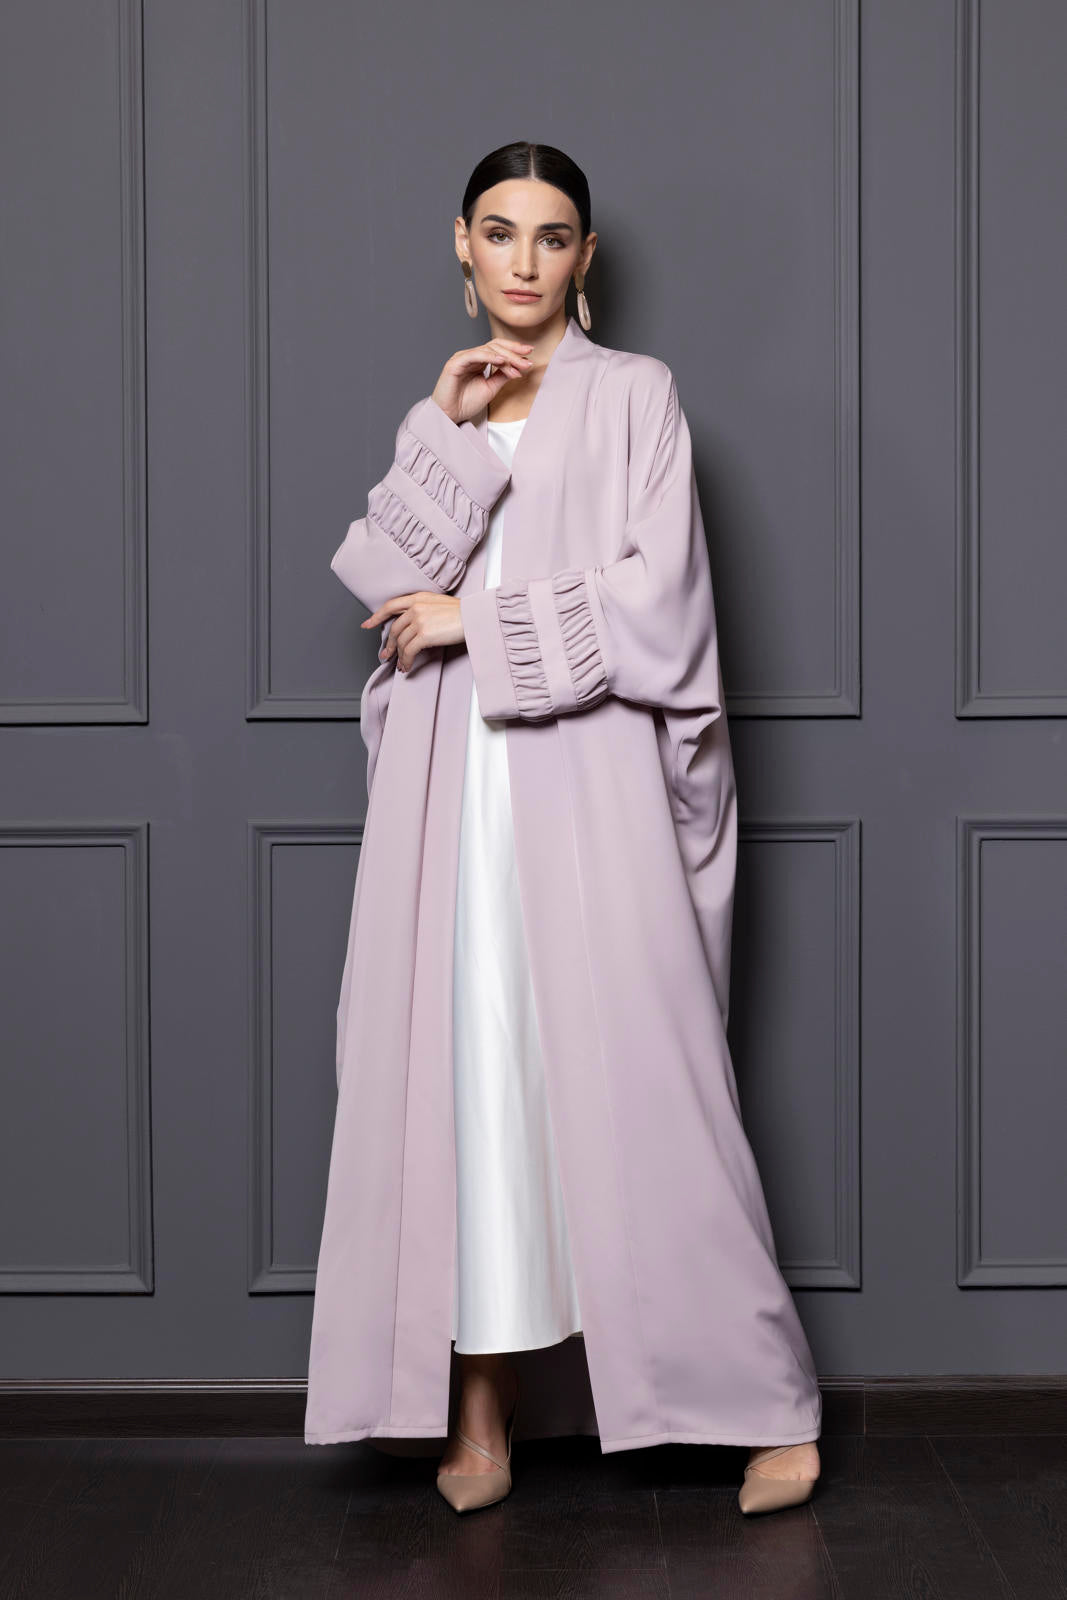 Pale Lavender abaya with gathered details